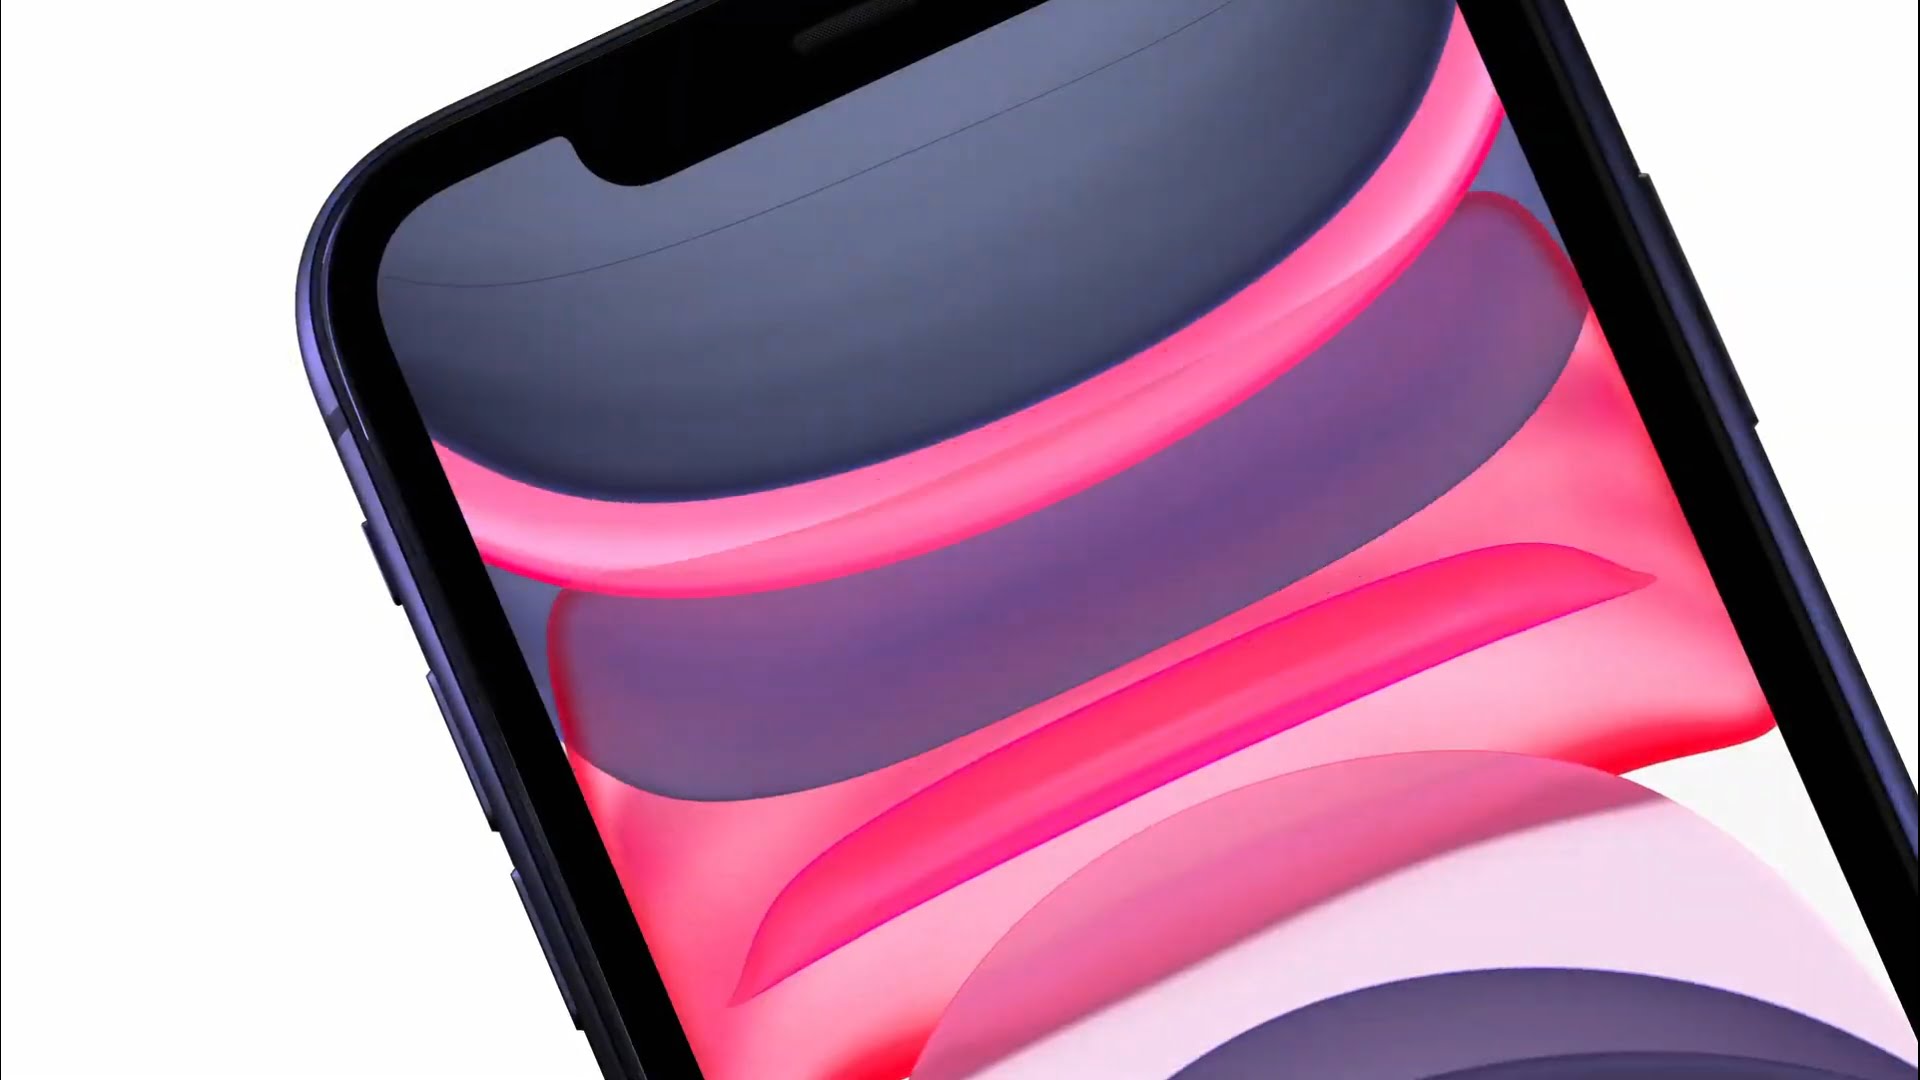 Apple iPhone 11 Now Official With A13 Bionic & More